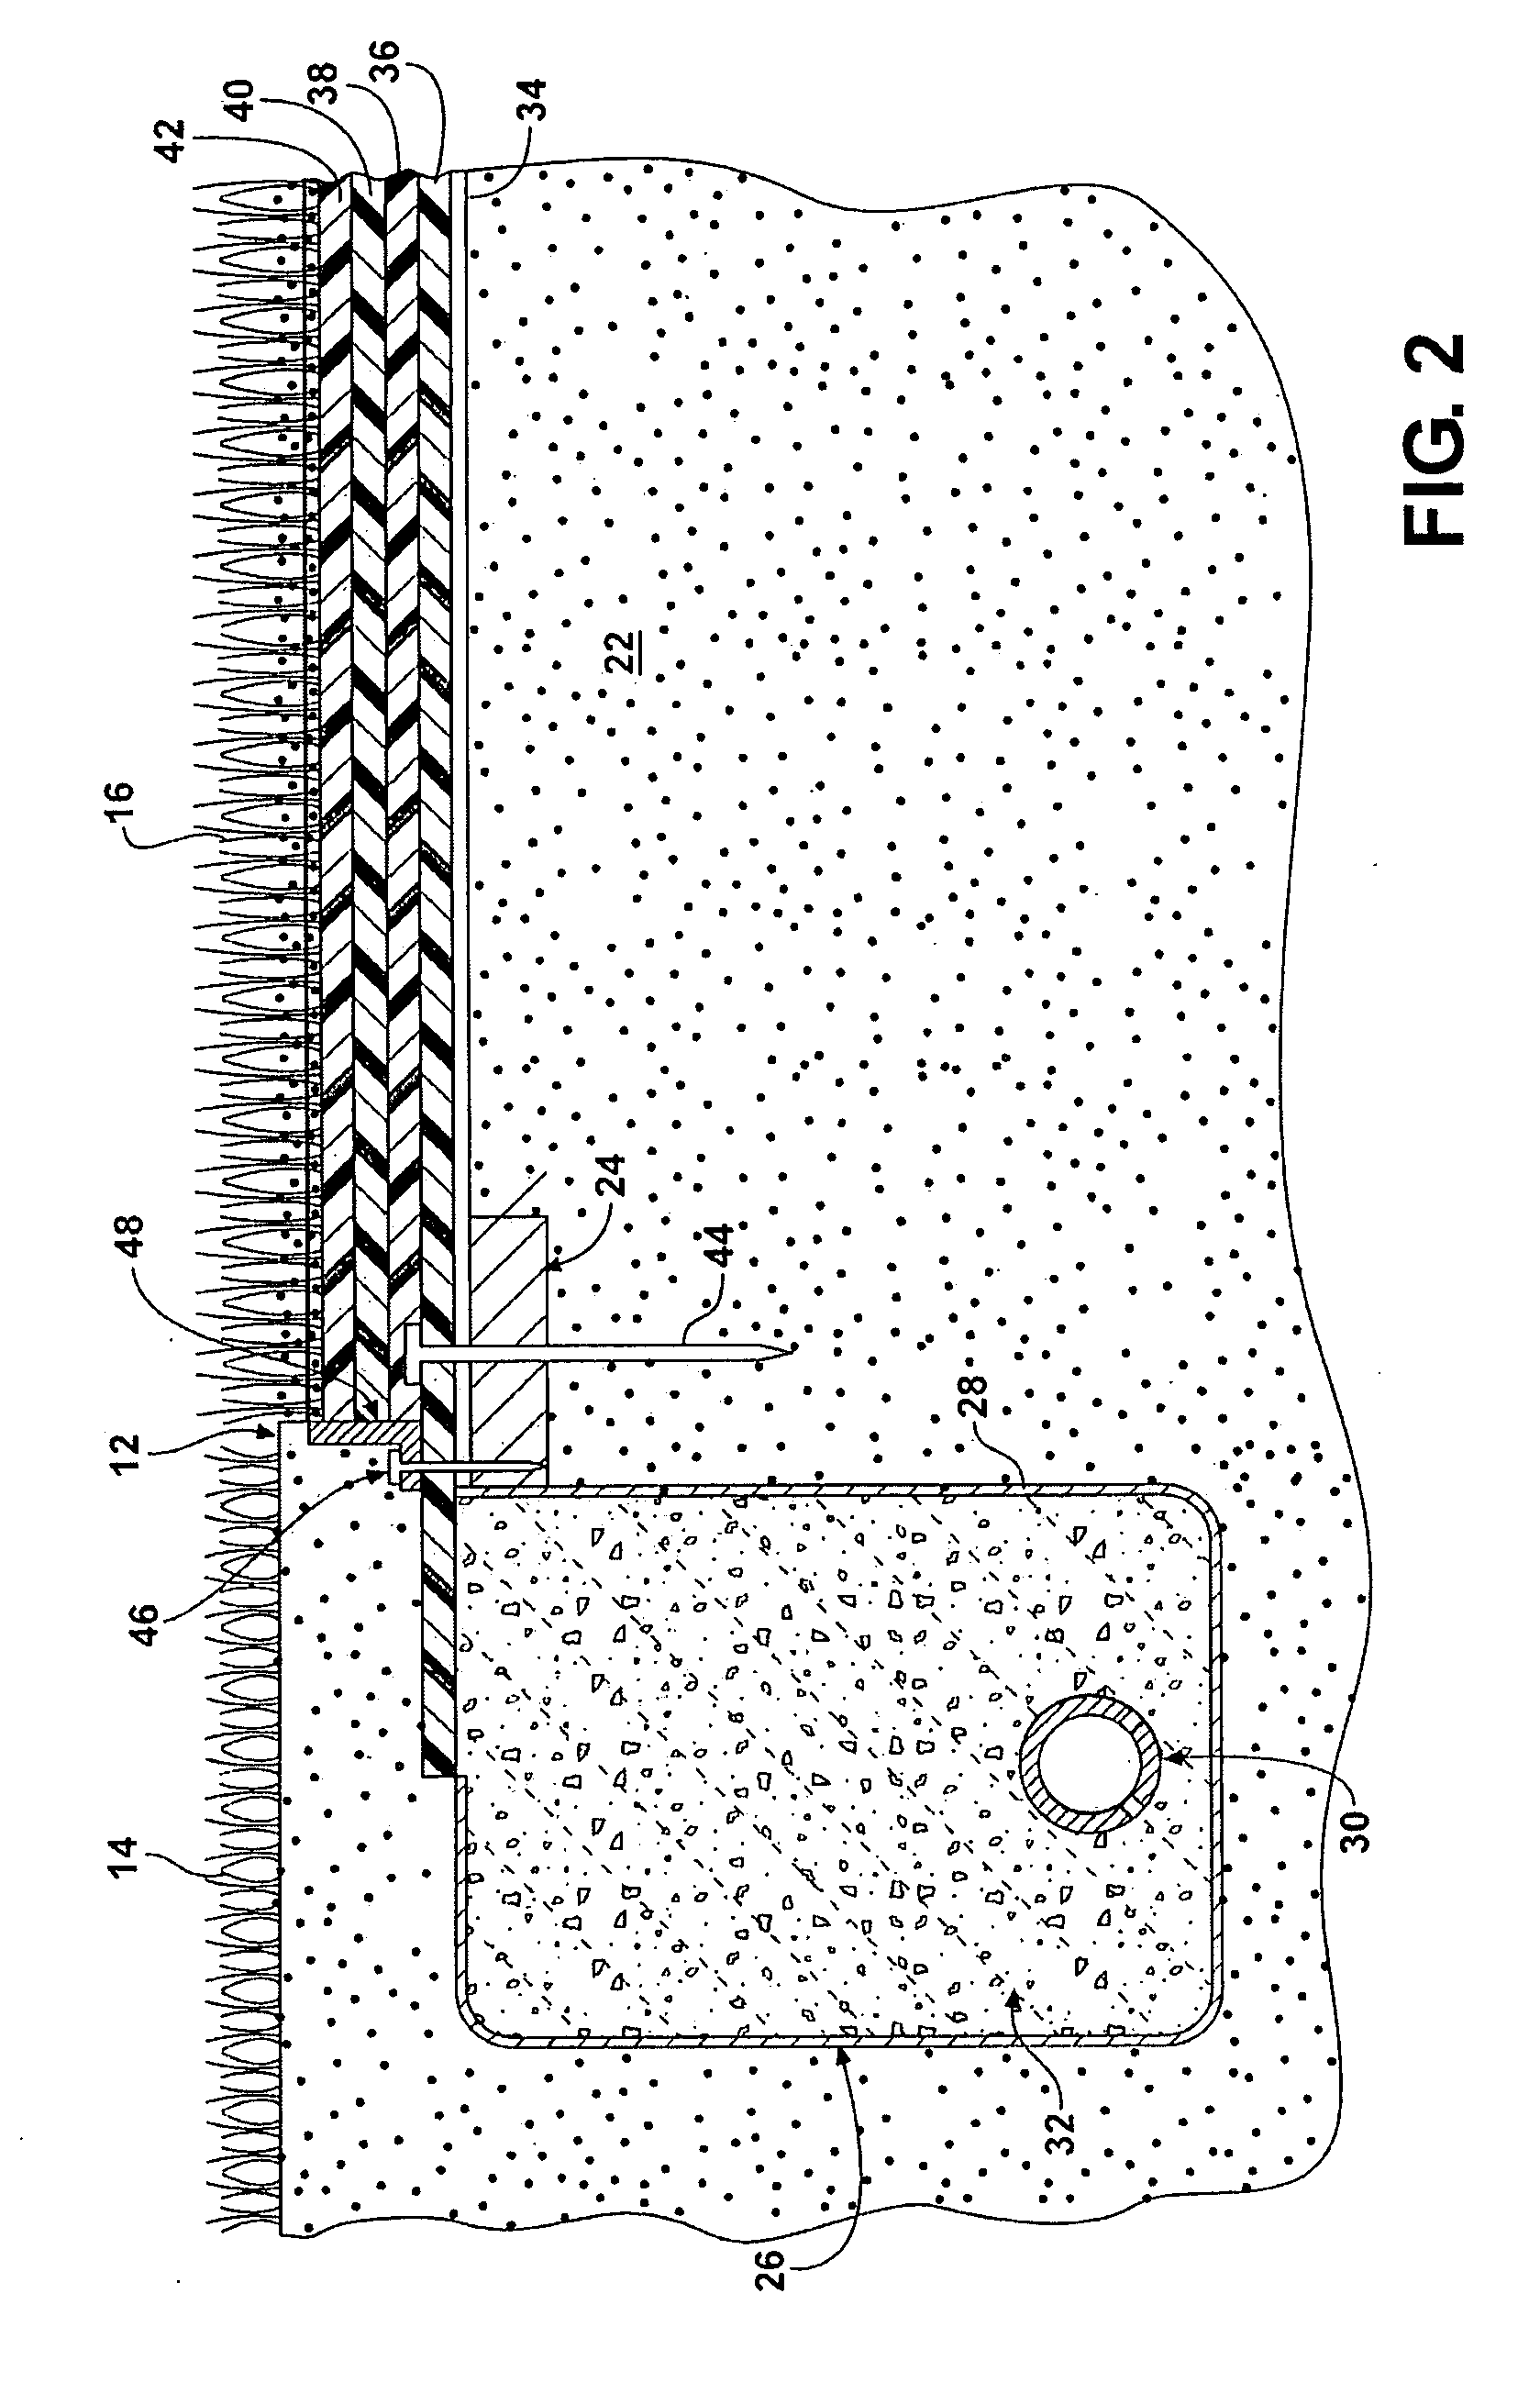 Shock absorbing, wheelchair accessible, recreational surface area and method of constructing same